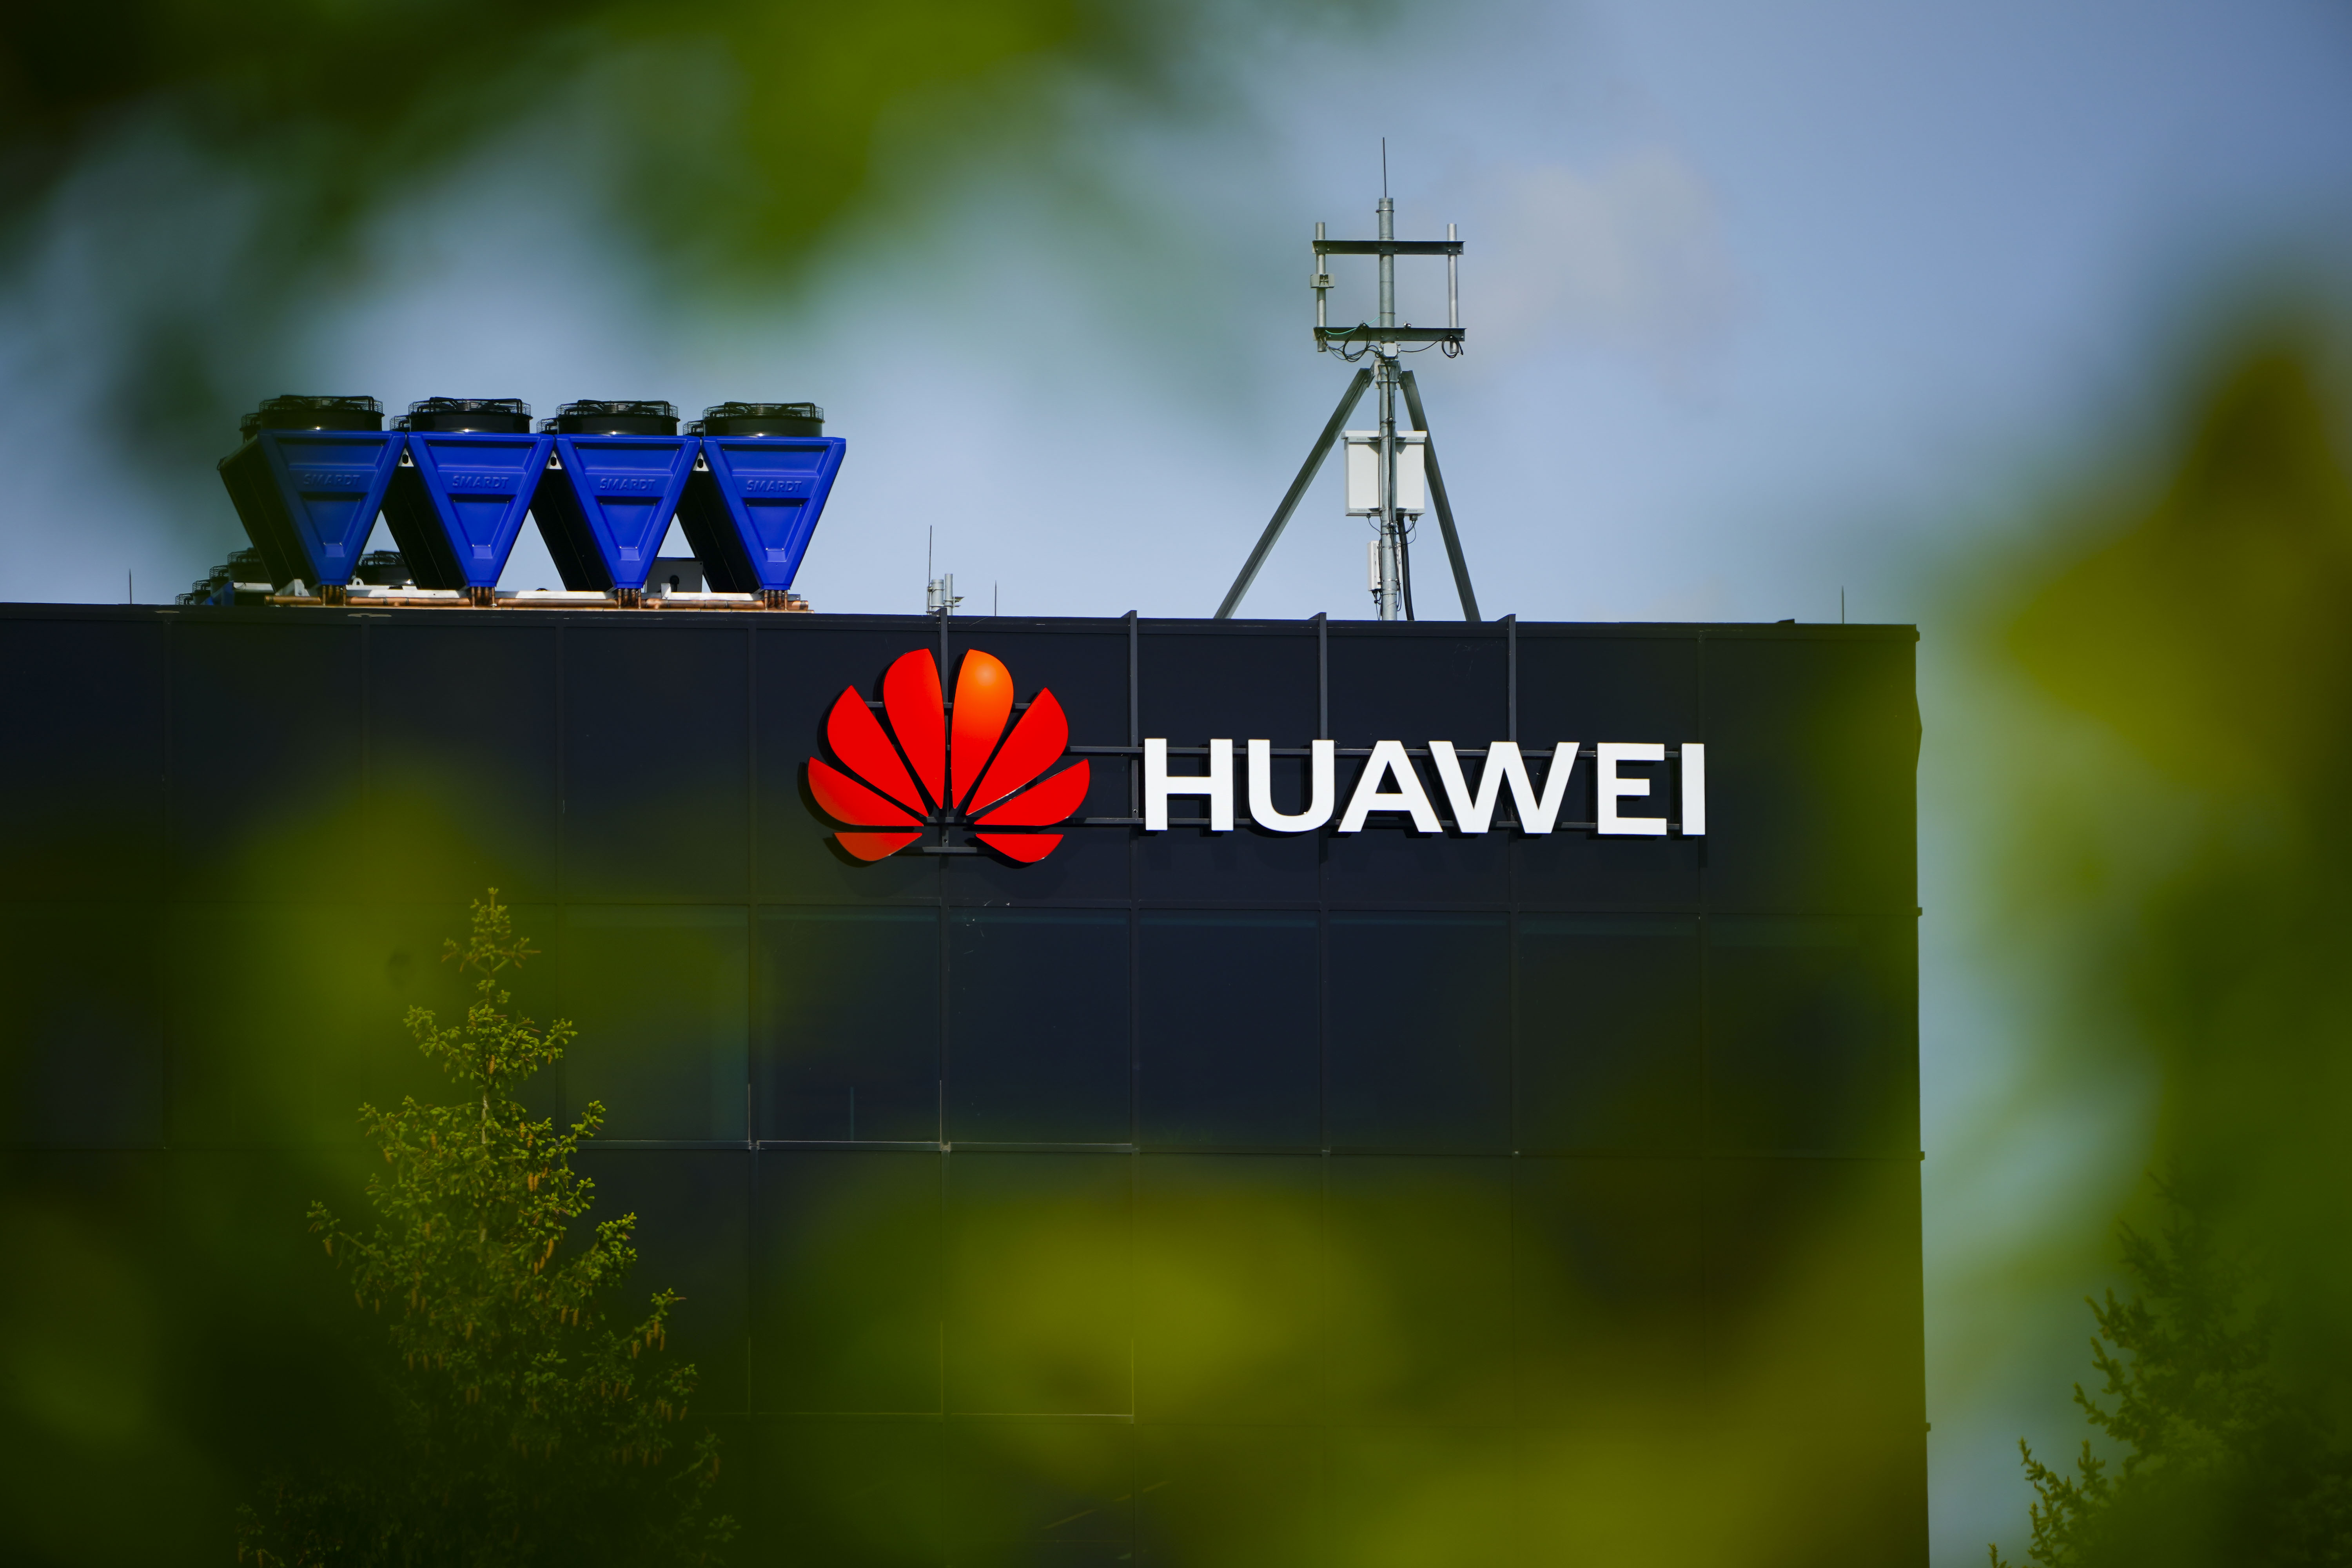 Canadian universities still partnering with Huawei despite 5G ban over  security - The Globe and Mail